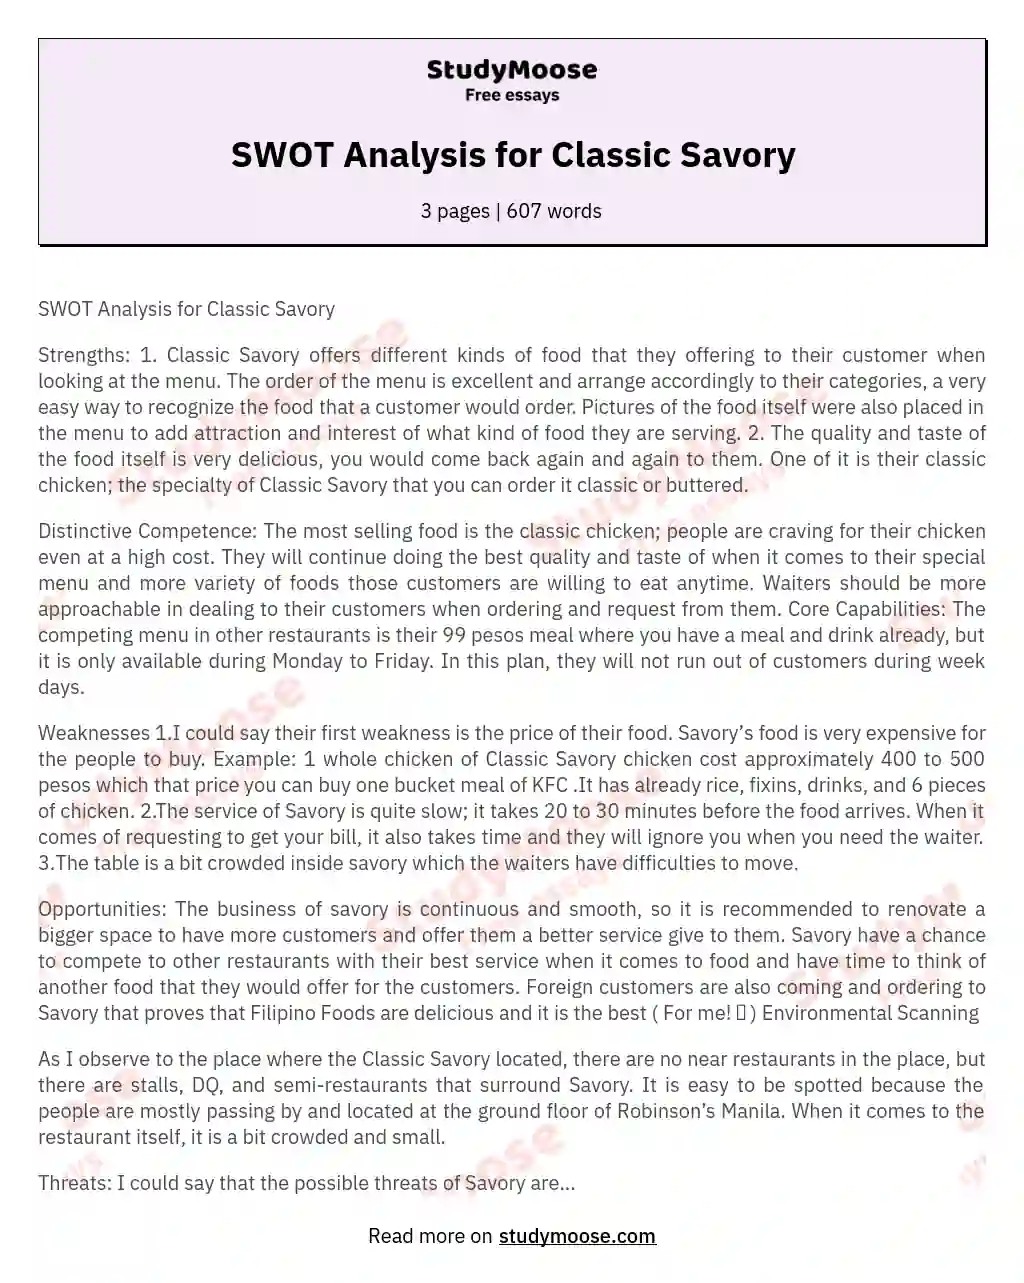 SWOT Analysis for Classic Savory essay